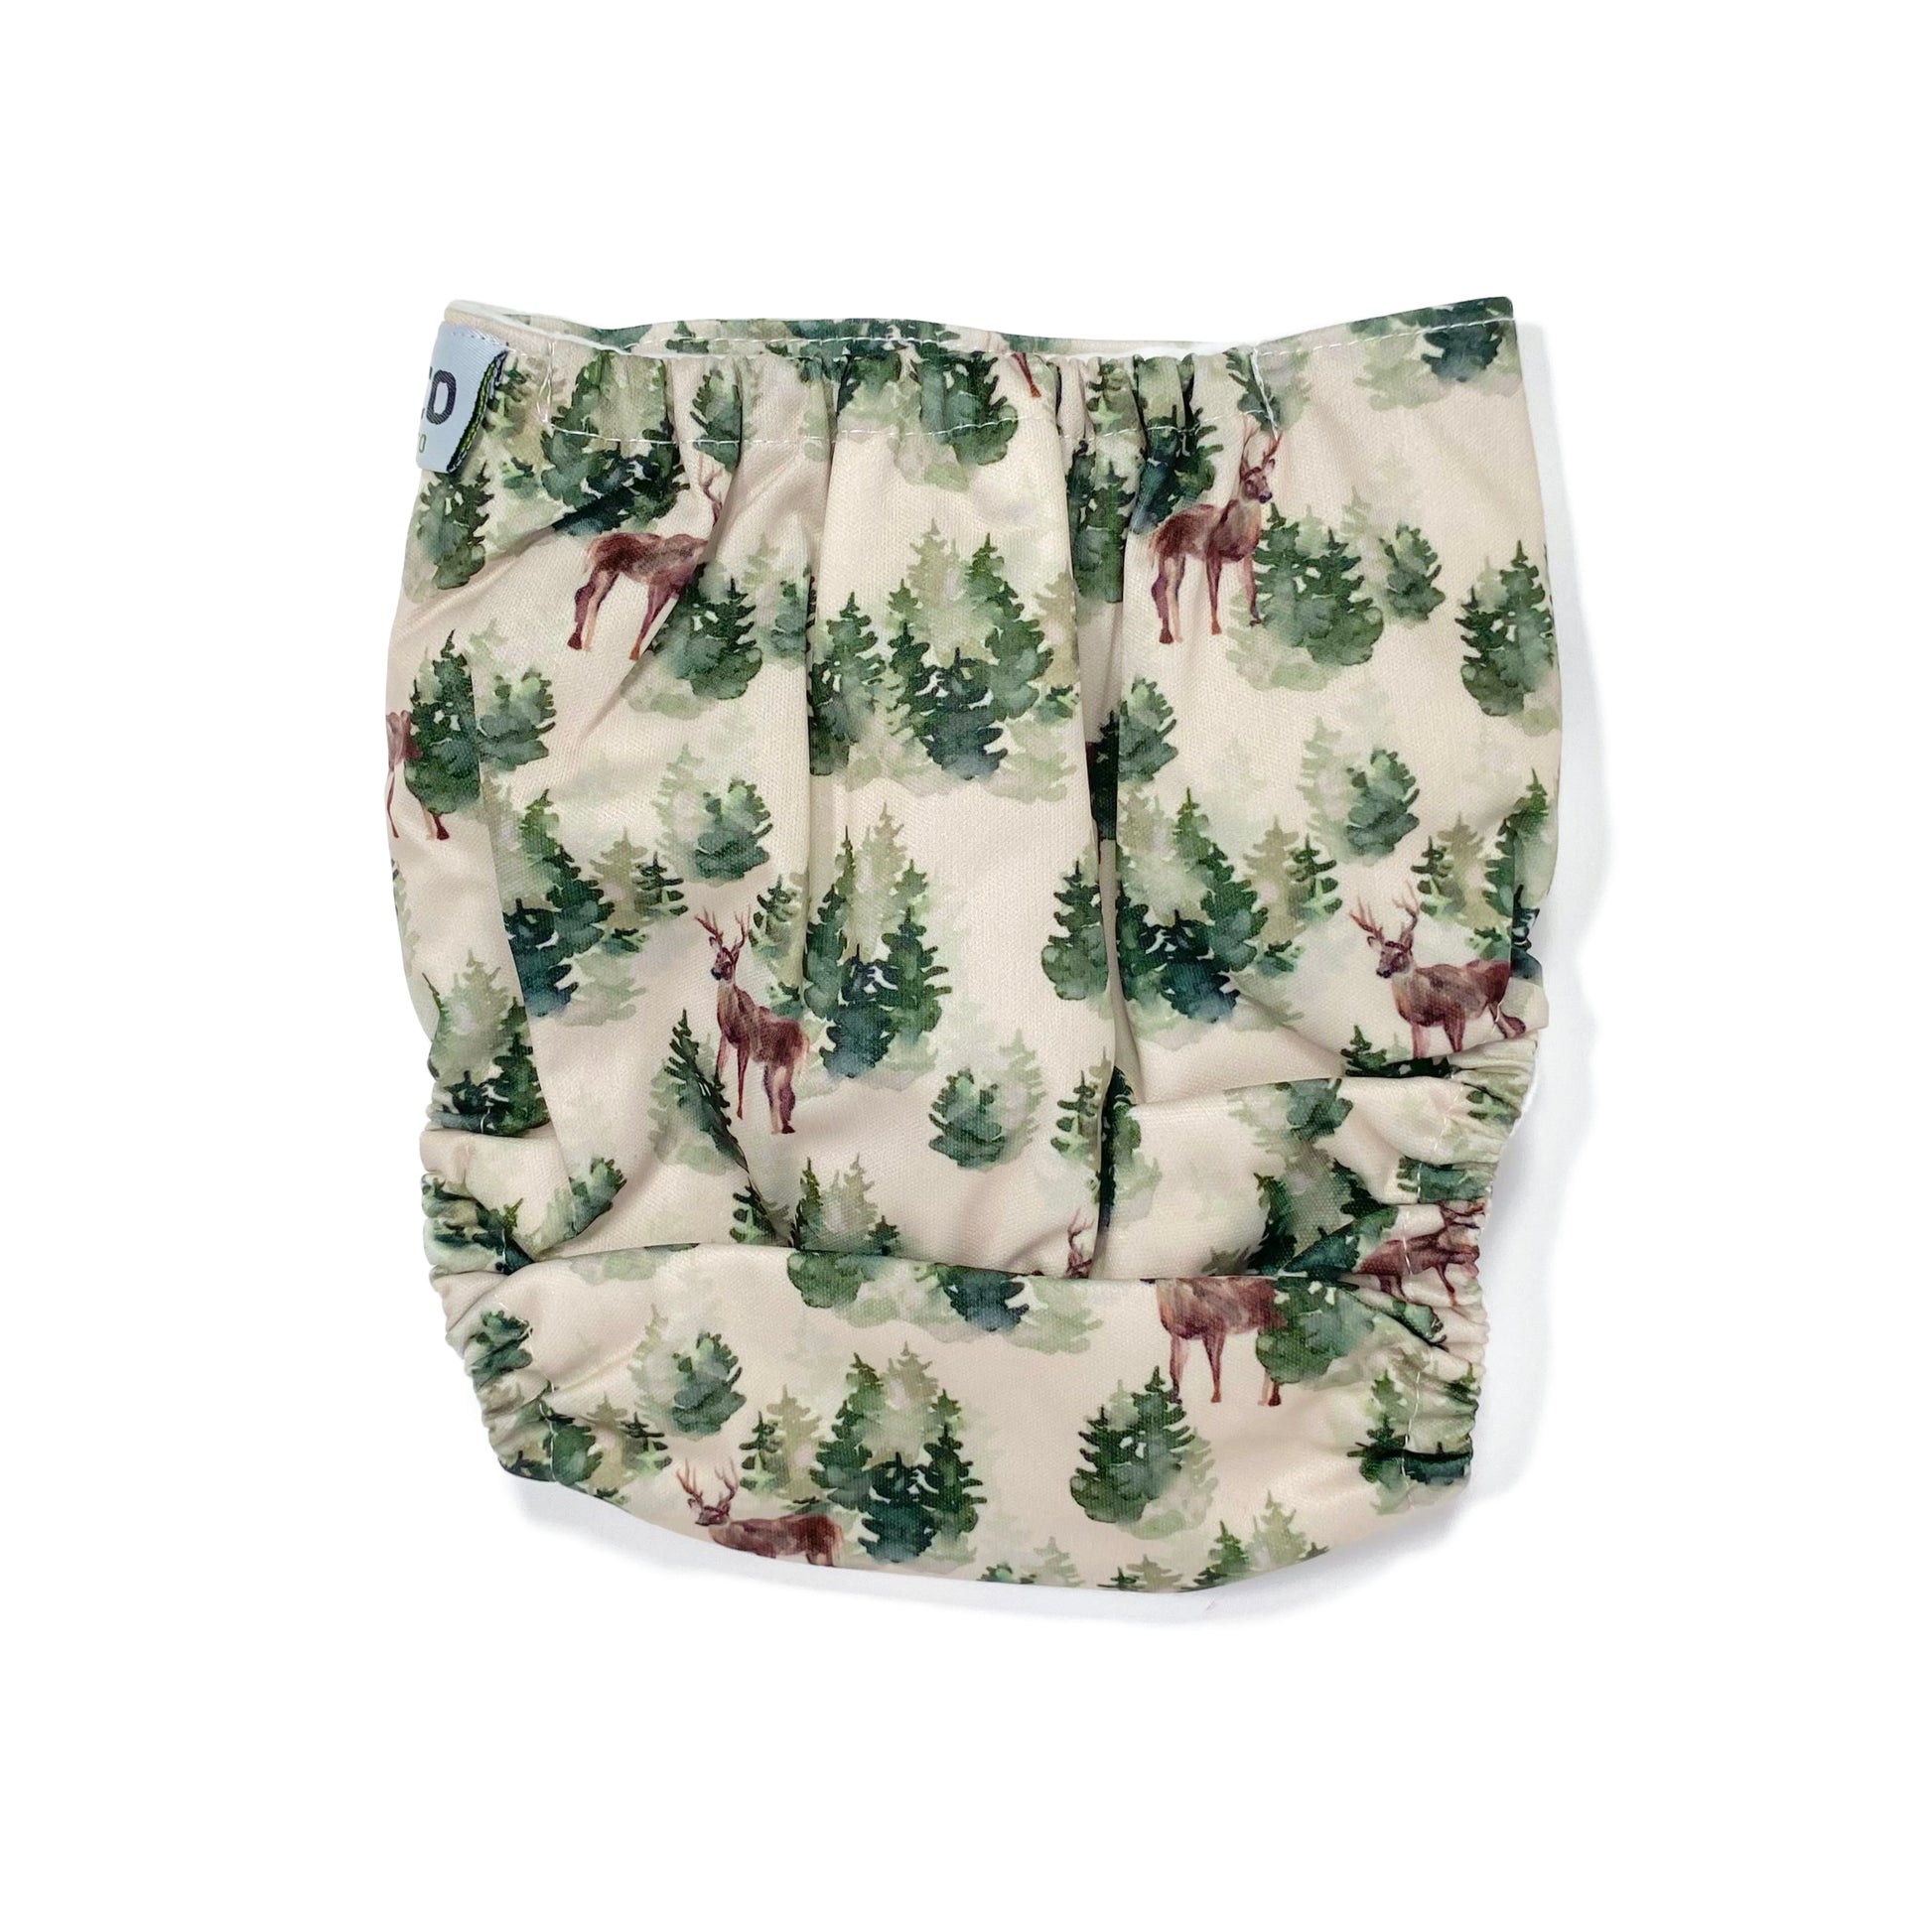 An adjustable reusable nappy for babies and toddlers, featuring a winter forest design with images of deer and pine trees on a cream background. View shows the back of the nappy.